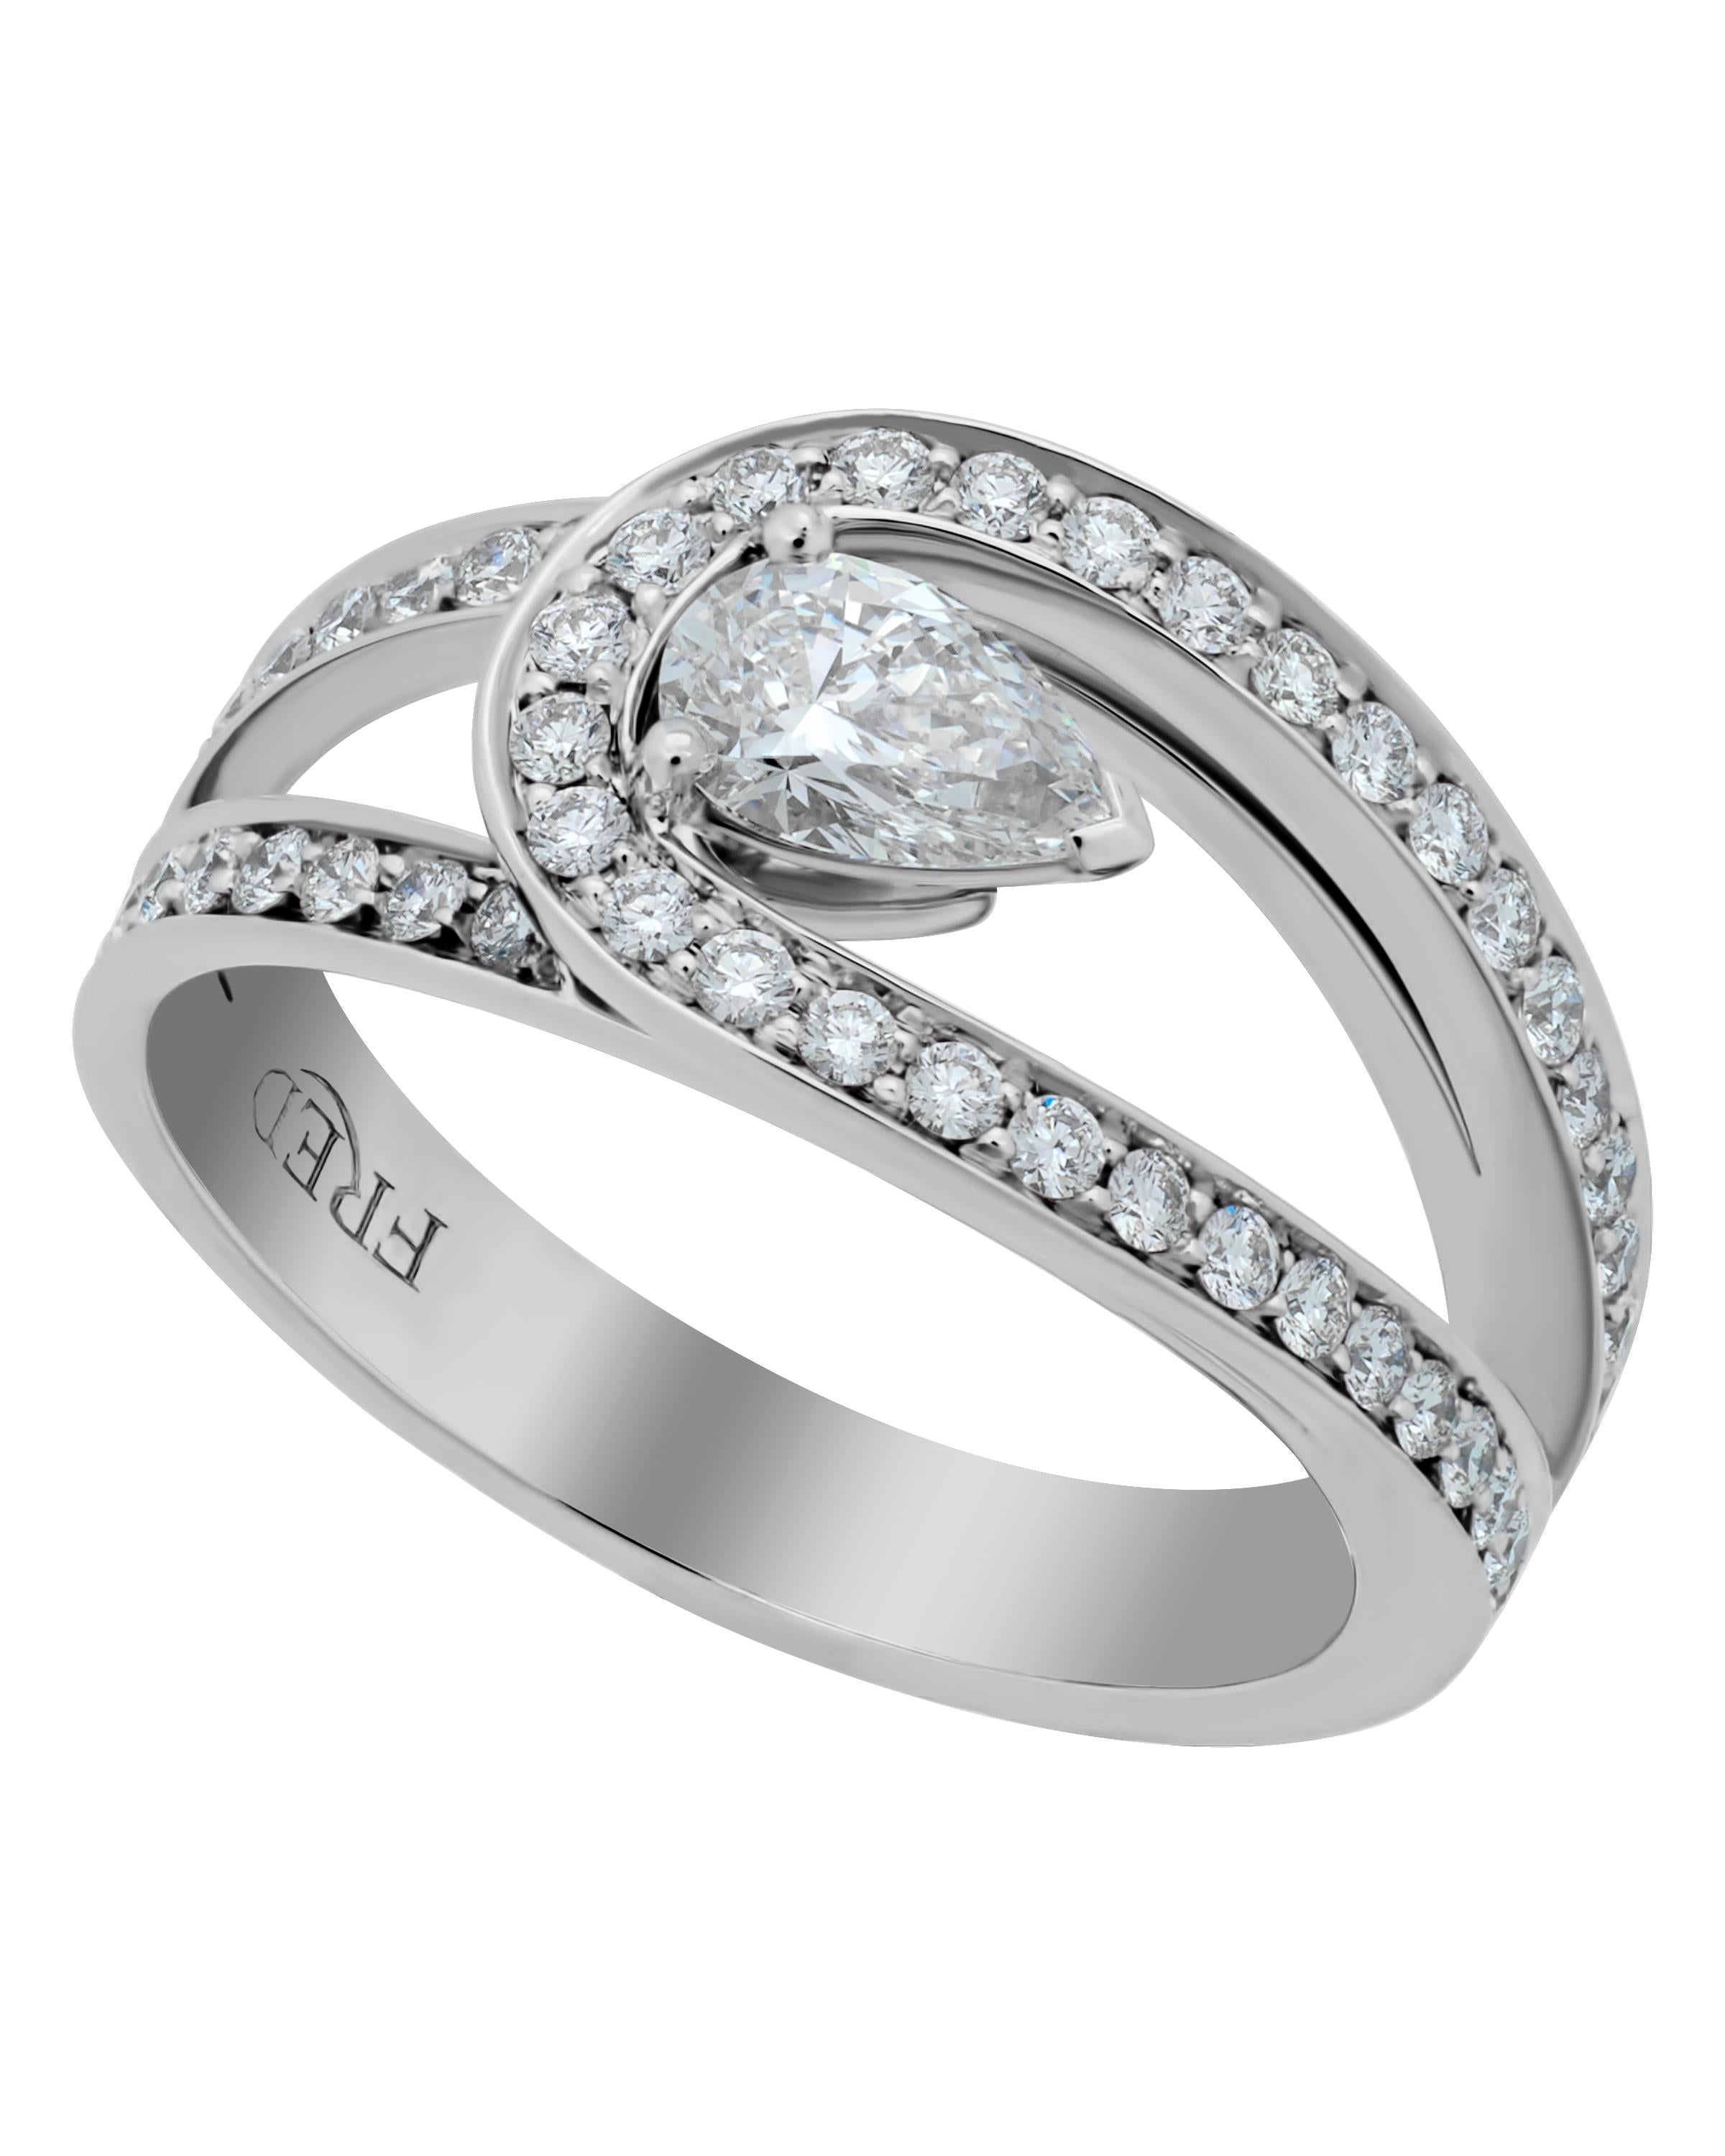 FRED Lovelight platinum engagement ring features a GIA certified 0.32ct. central prong set diamond with color and clarity: E, VVS1 adorned with 0.55ct. tw. pavé diamonds. The ring size is 5.25 (50.0). The weight is 8.5g.
